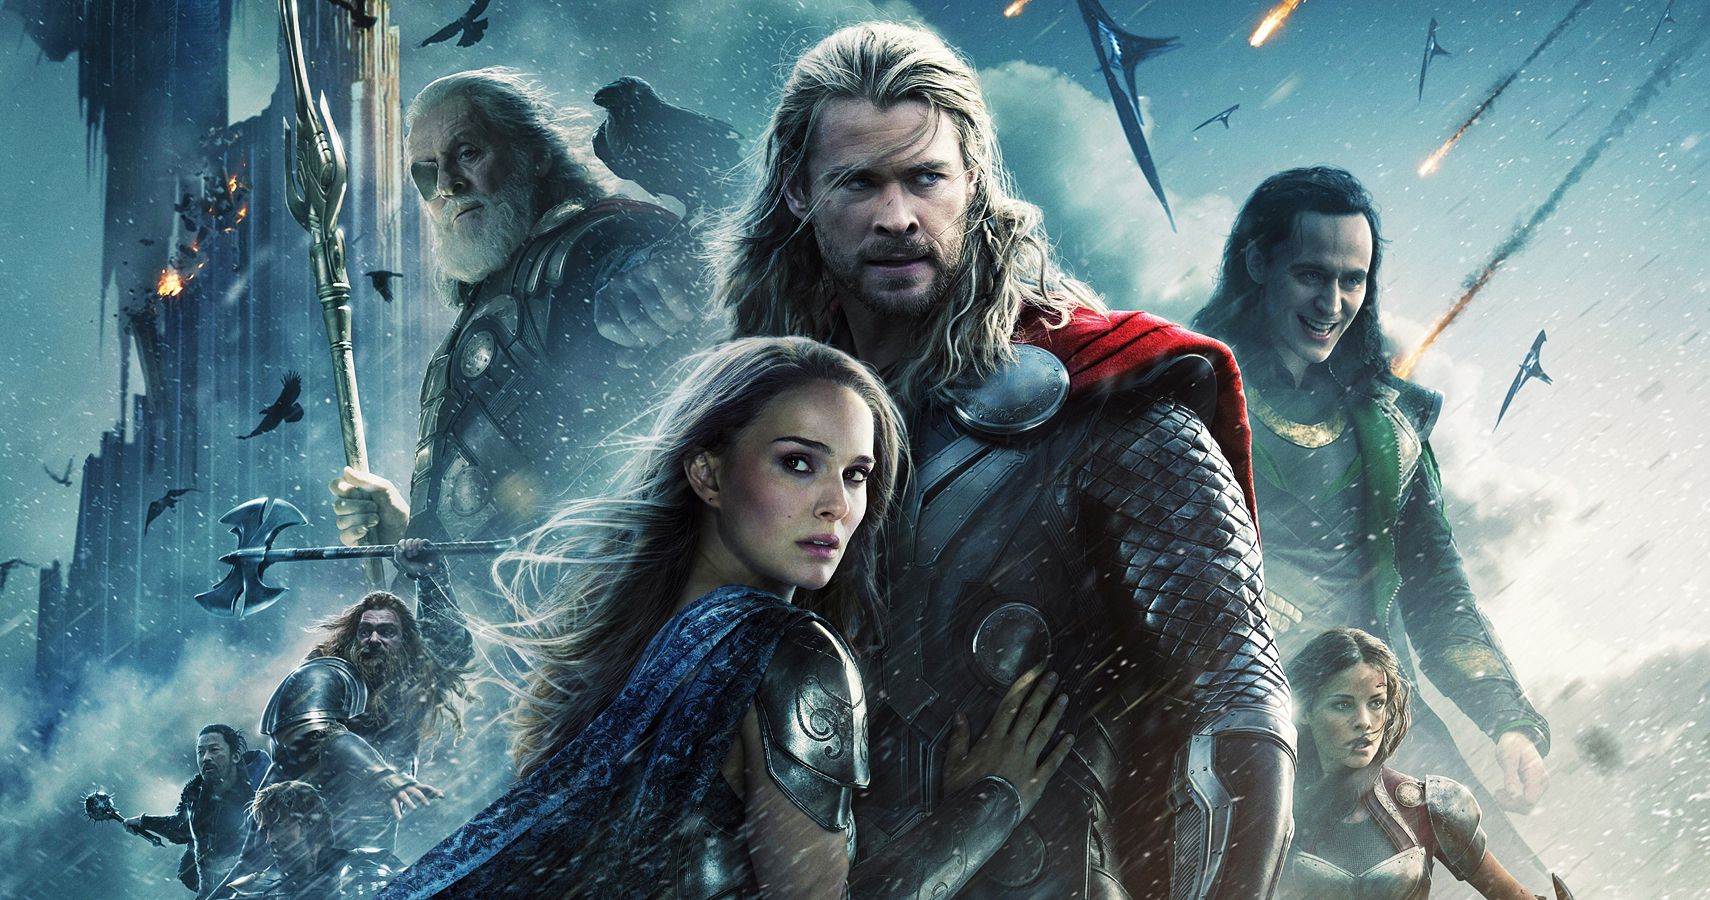 Thor The Dark World's poster shows the film's main characters in Asgard